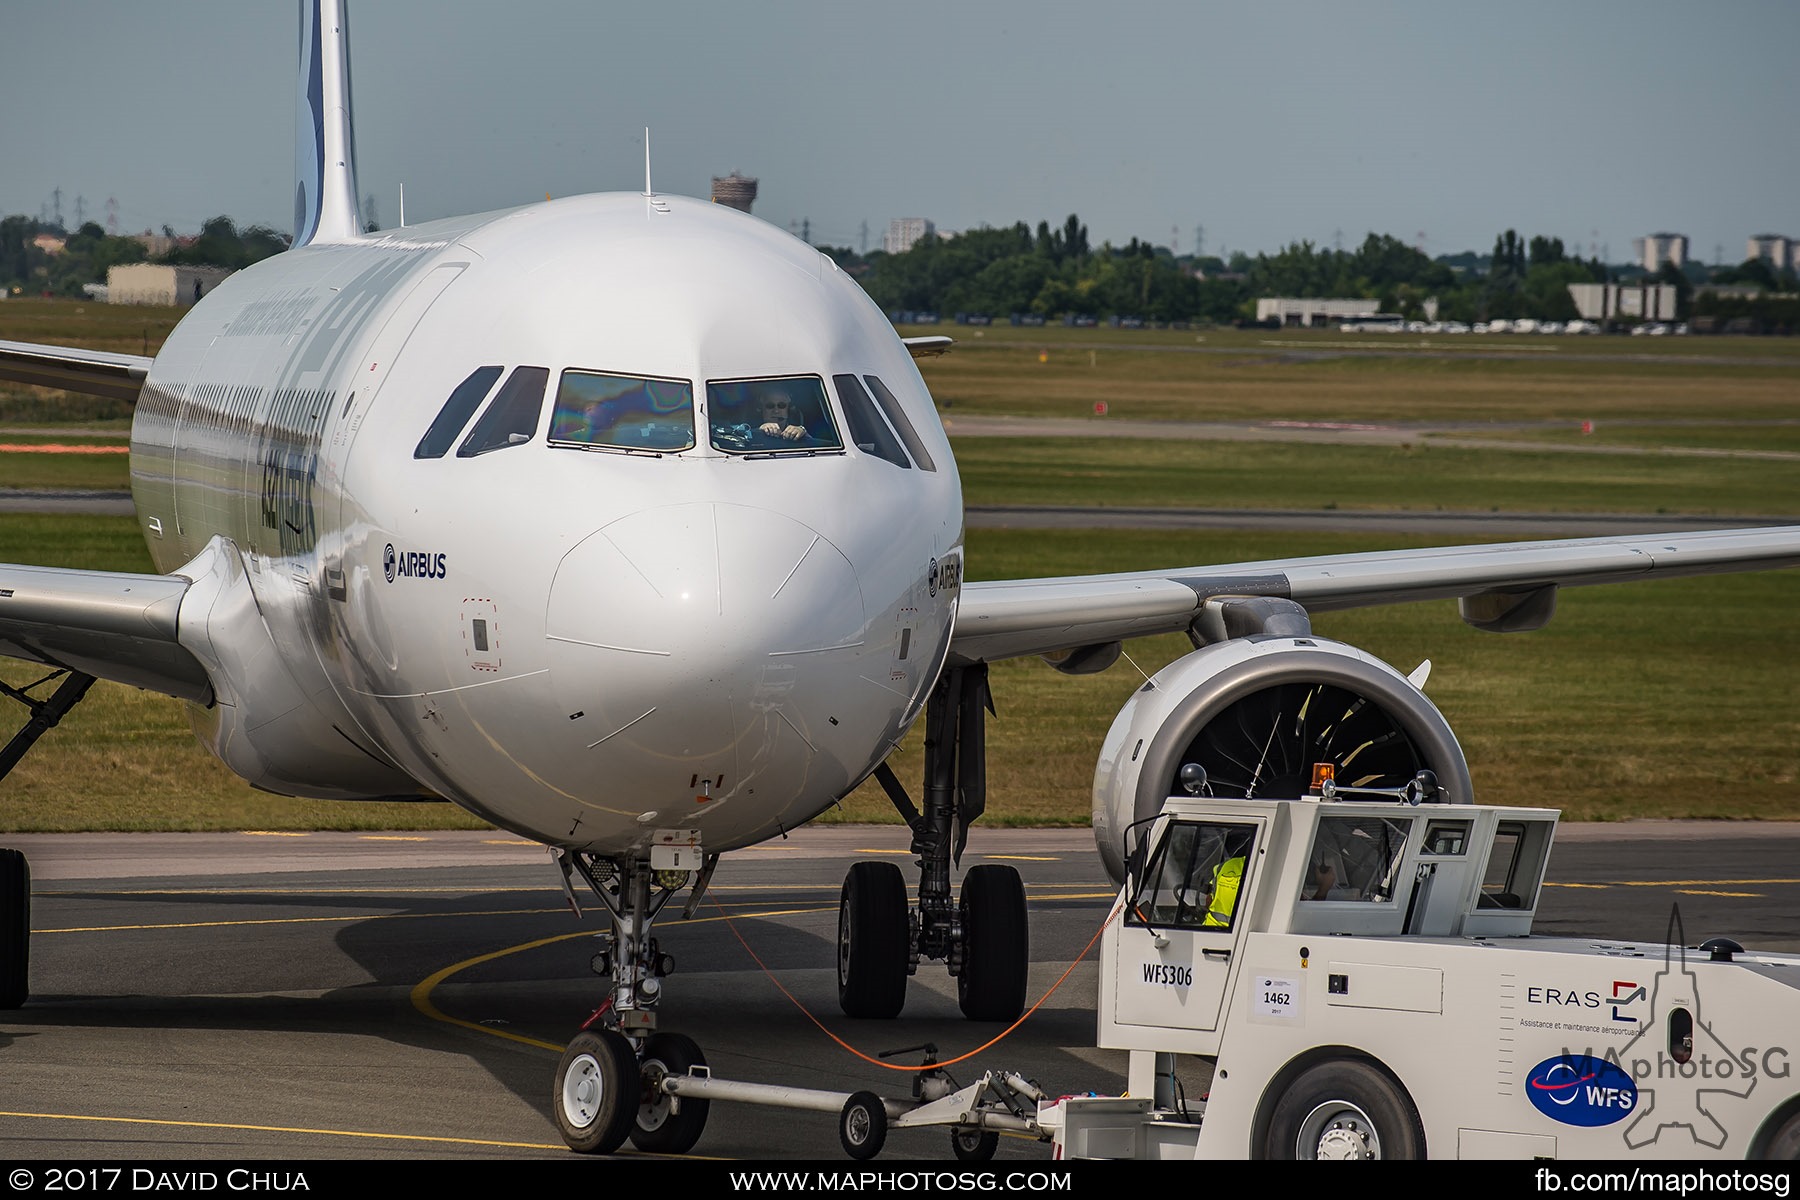 35. Pilot of the Airbus A320neo looks on as the aircraft is towed back to the Static Display Area.